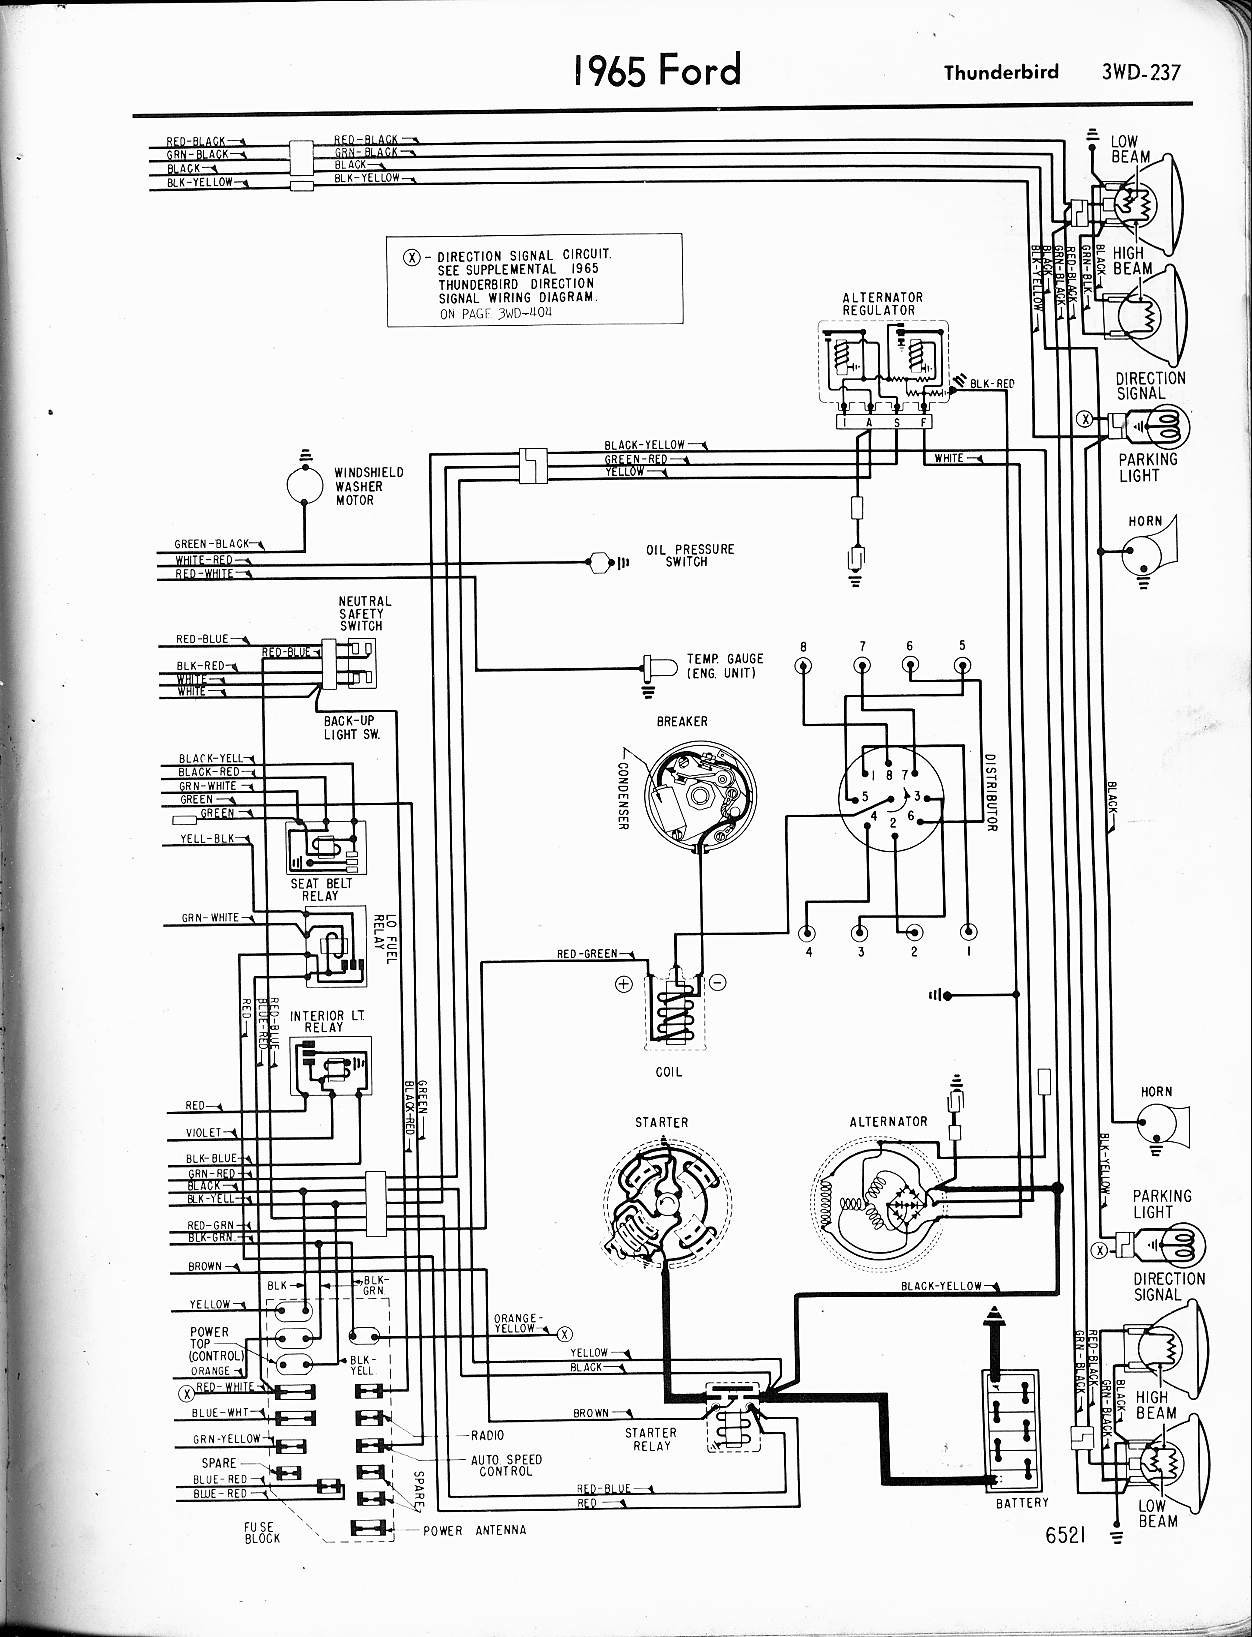 Ford Econoline Wiring Diagram Also 1966 Ford Thunderbird Wiring